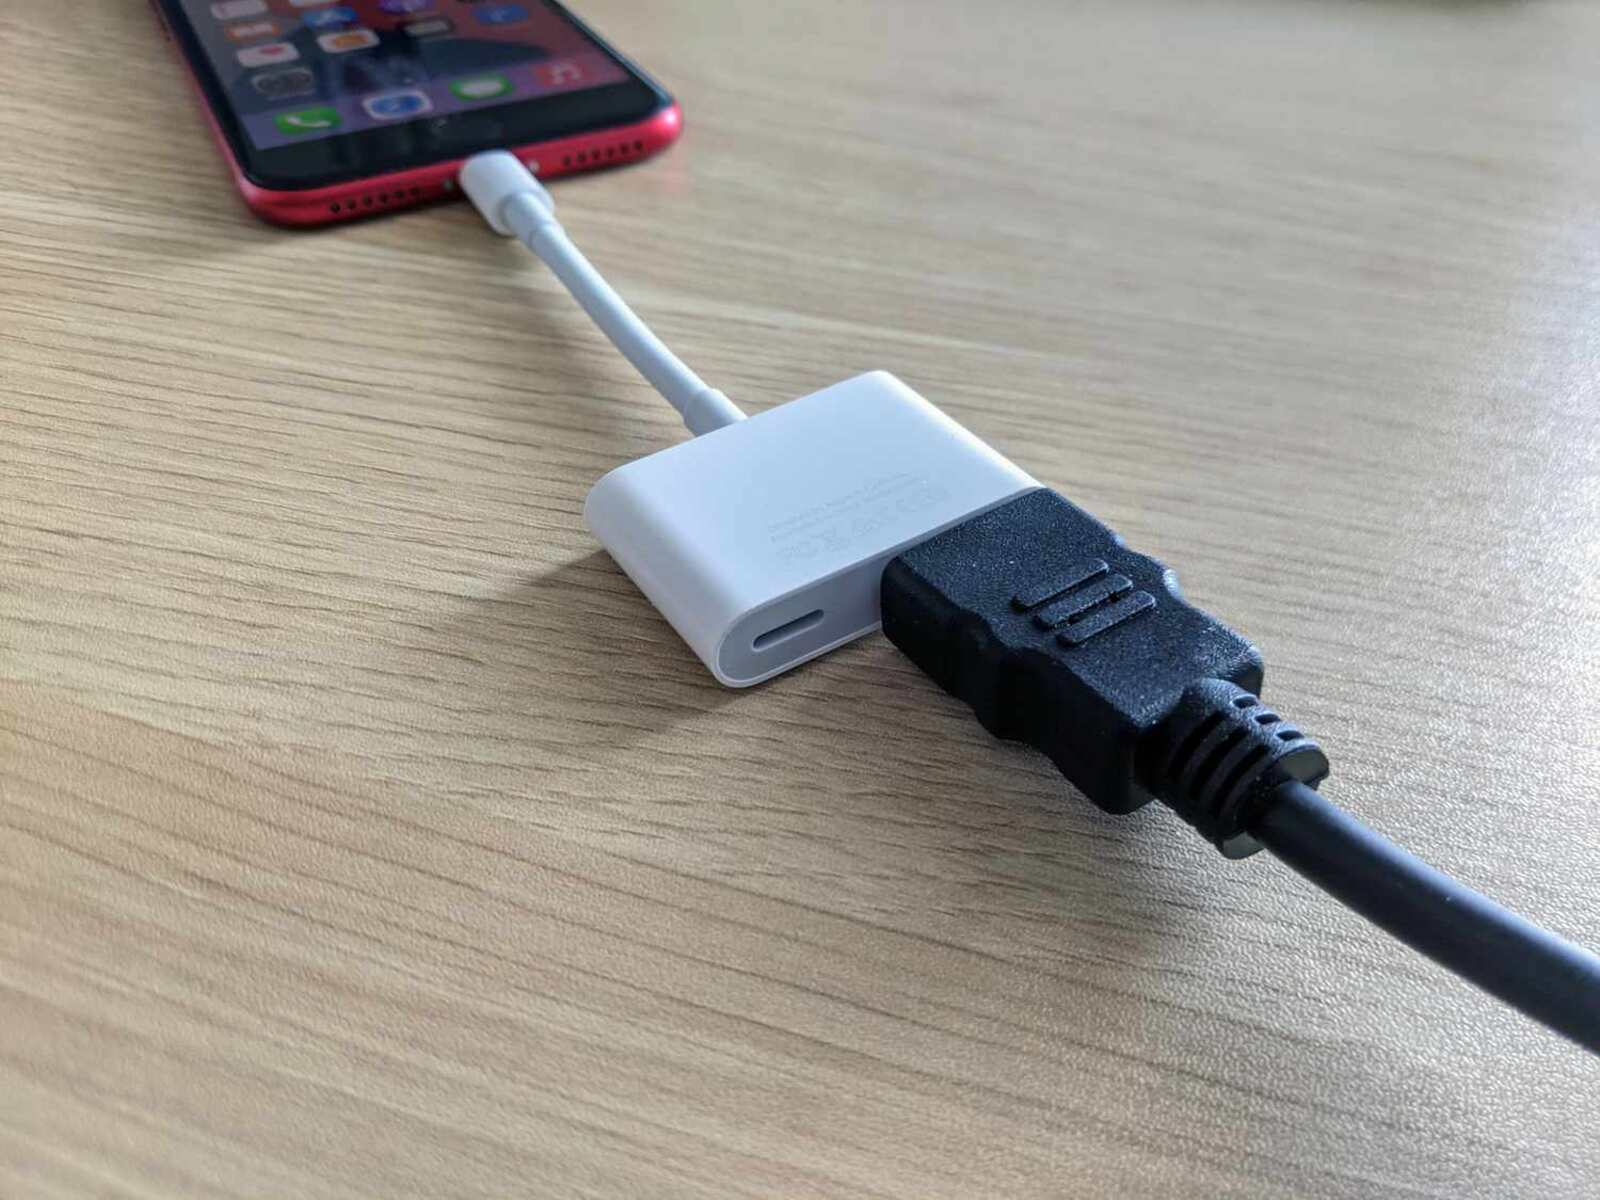 How To Connect Your IPhone To A Projector